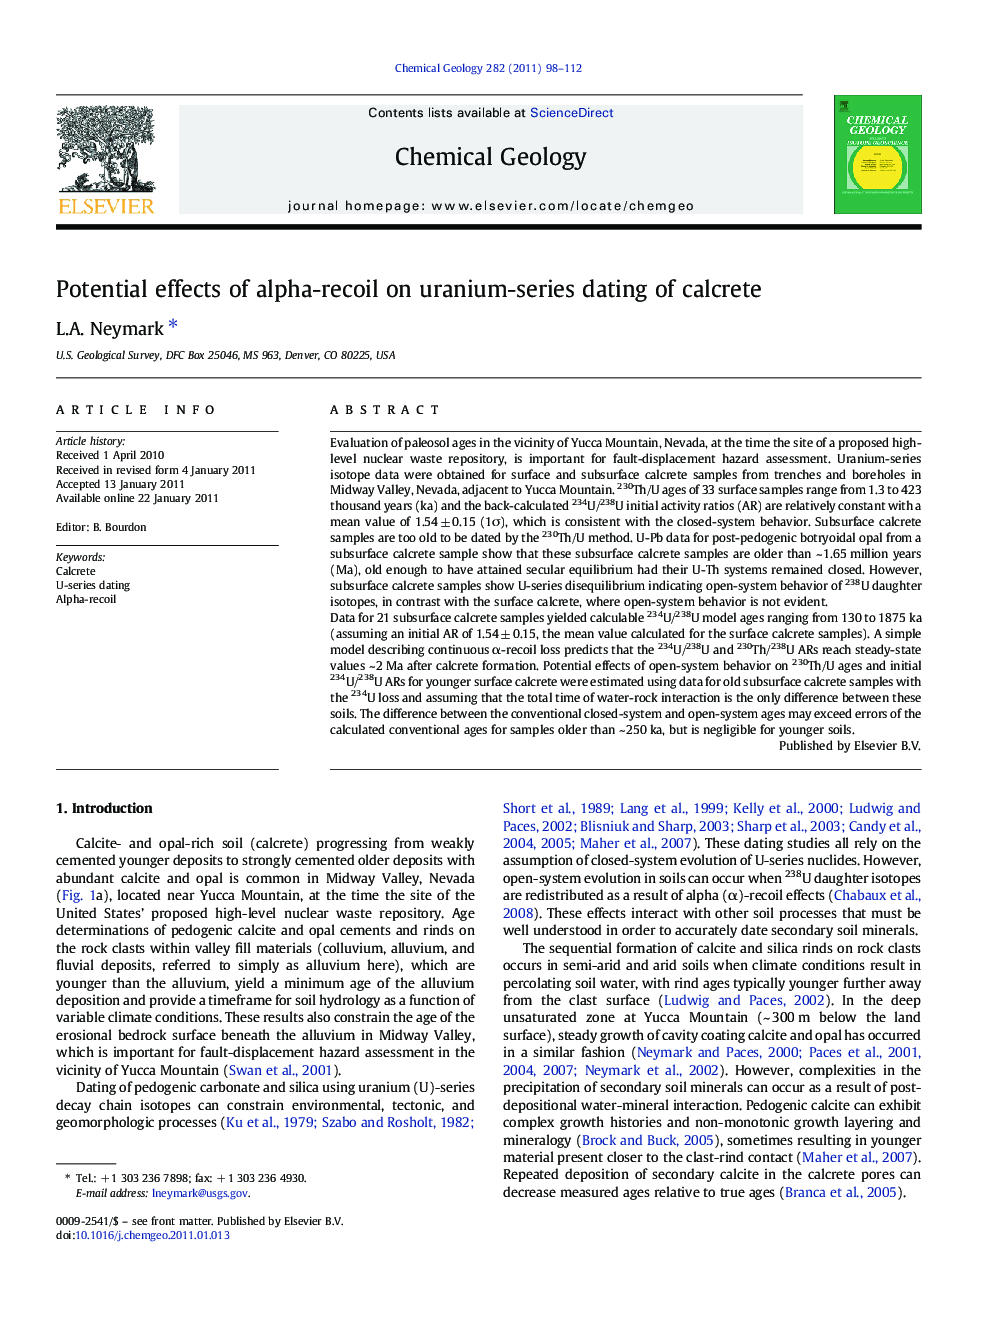 Potential effects of alpha-recoil on uranium-series dating of calcrete